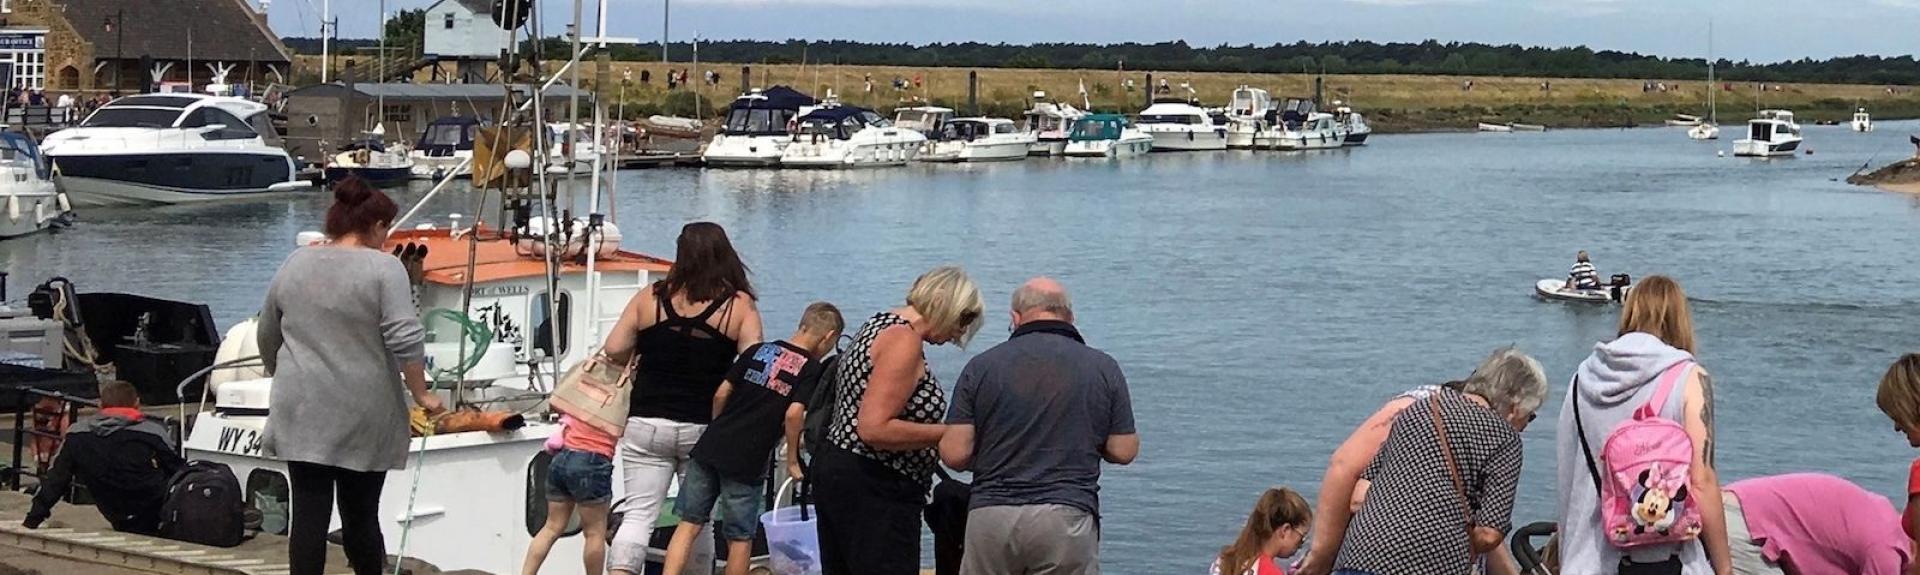 Families crabbing on a quayside at high tide